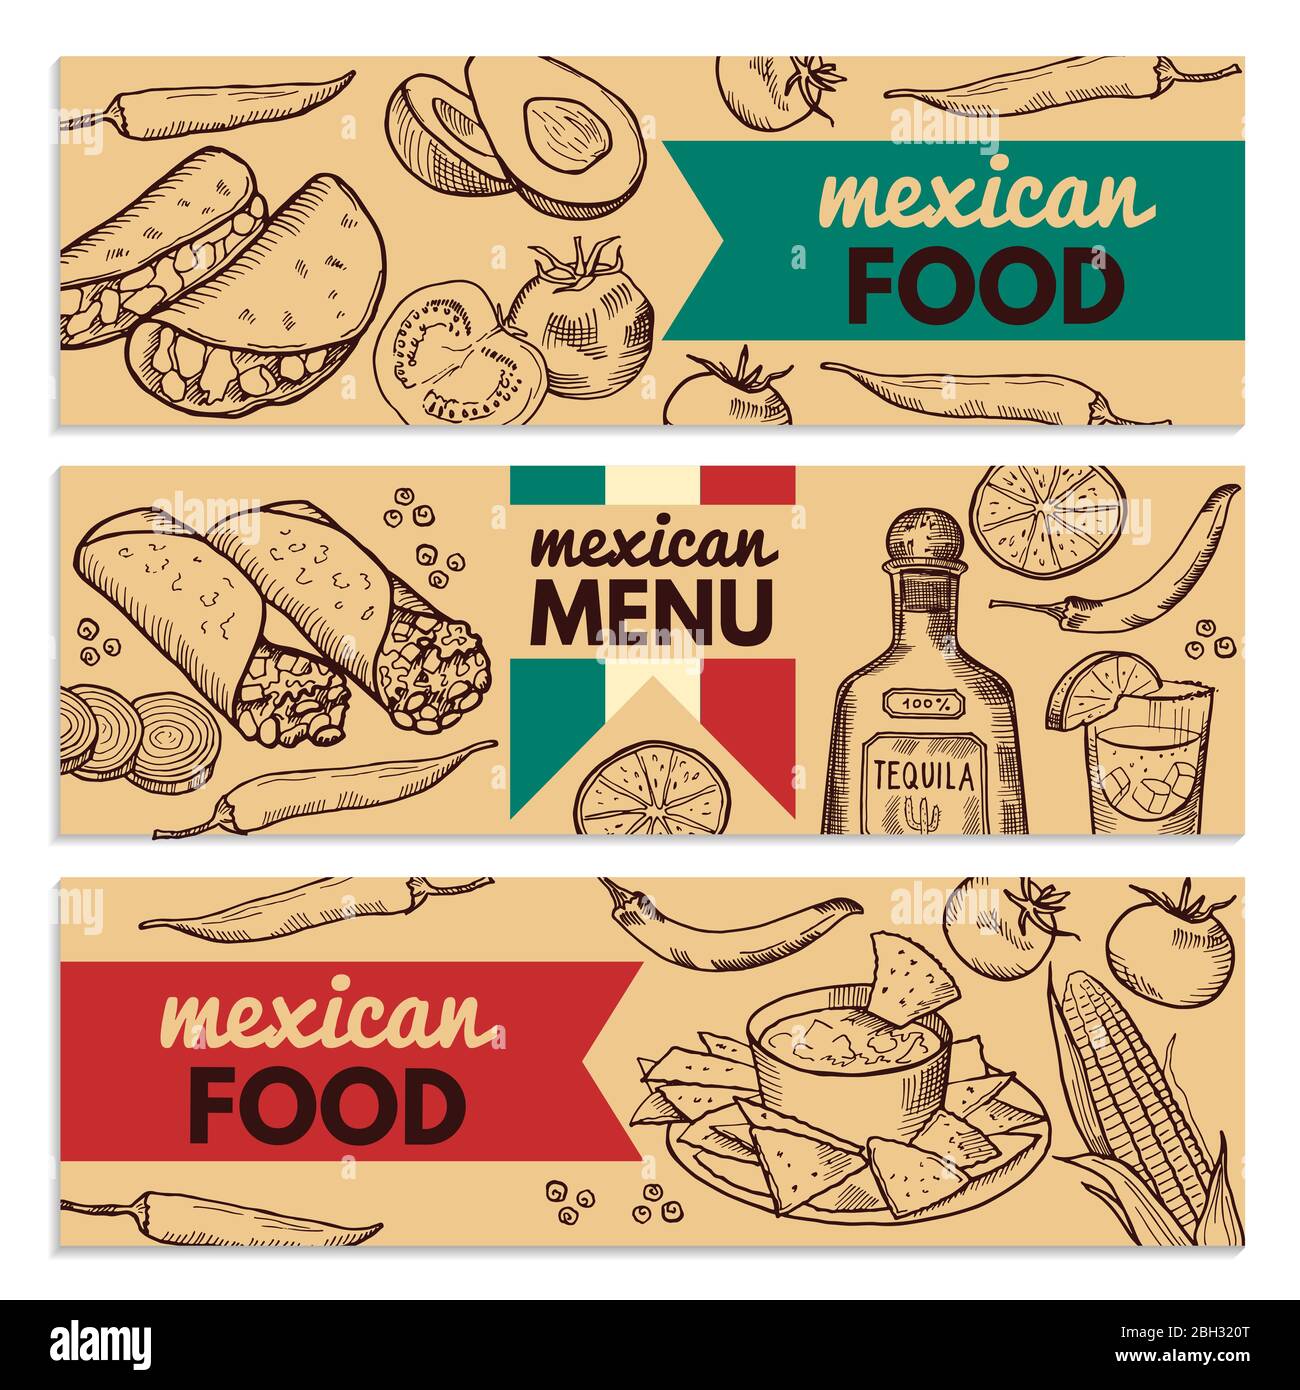 Banners set with picture of different mexican foods for restaurant menu. Mexican food banner menu. Vector illustration Stock Vector